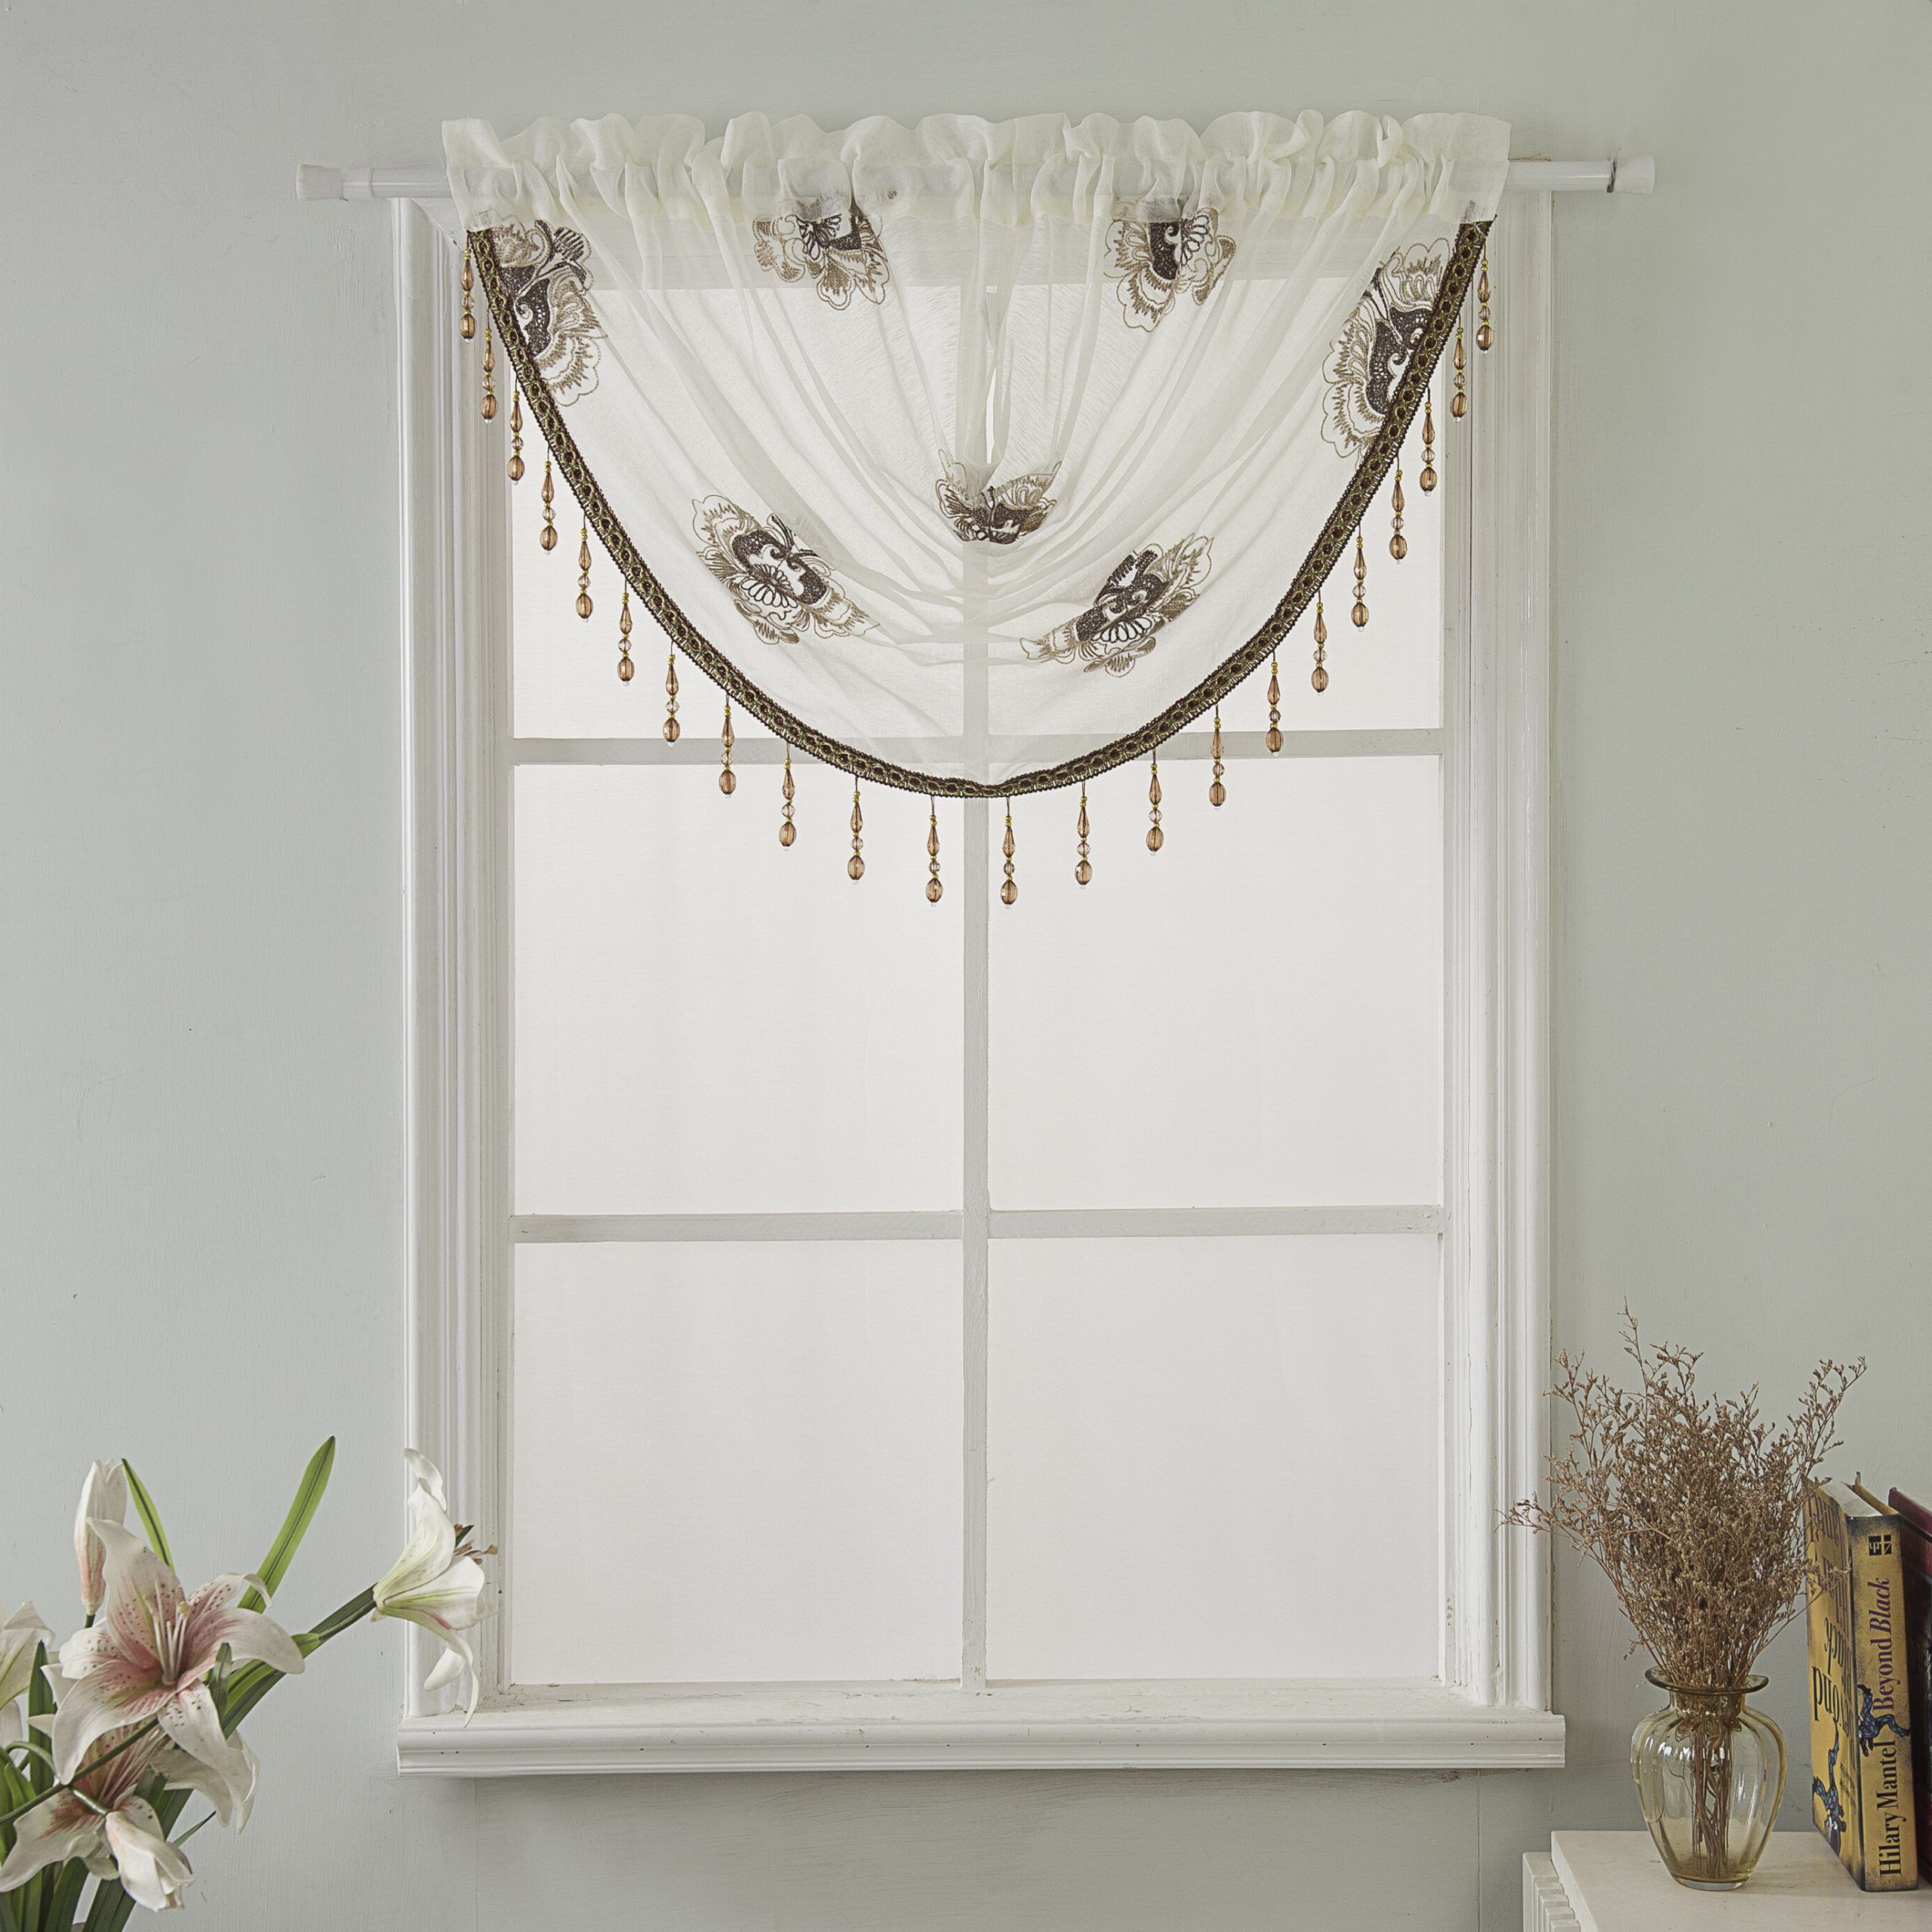 Berton 47" Window Valance With Regard To Navy Vertical Ruffled Waterfall Valance And Curtain Tiers (View 15 of 20)